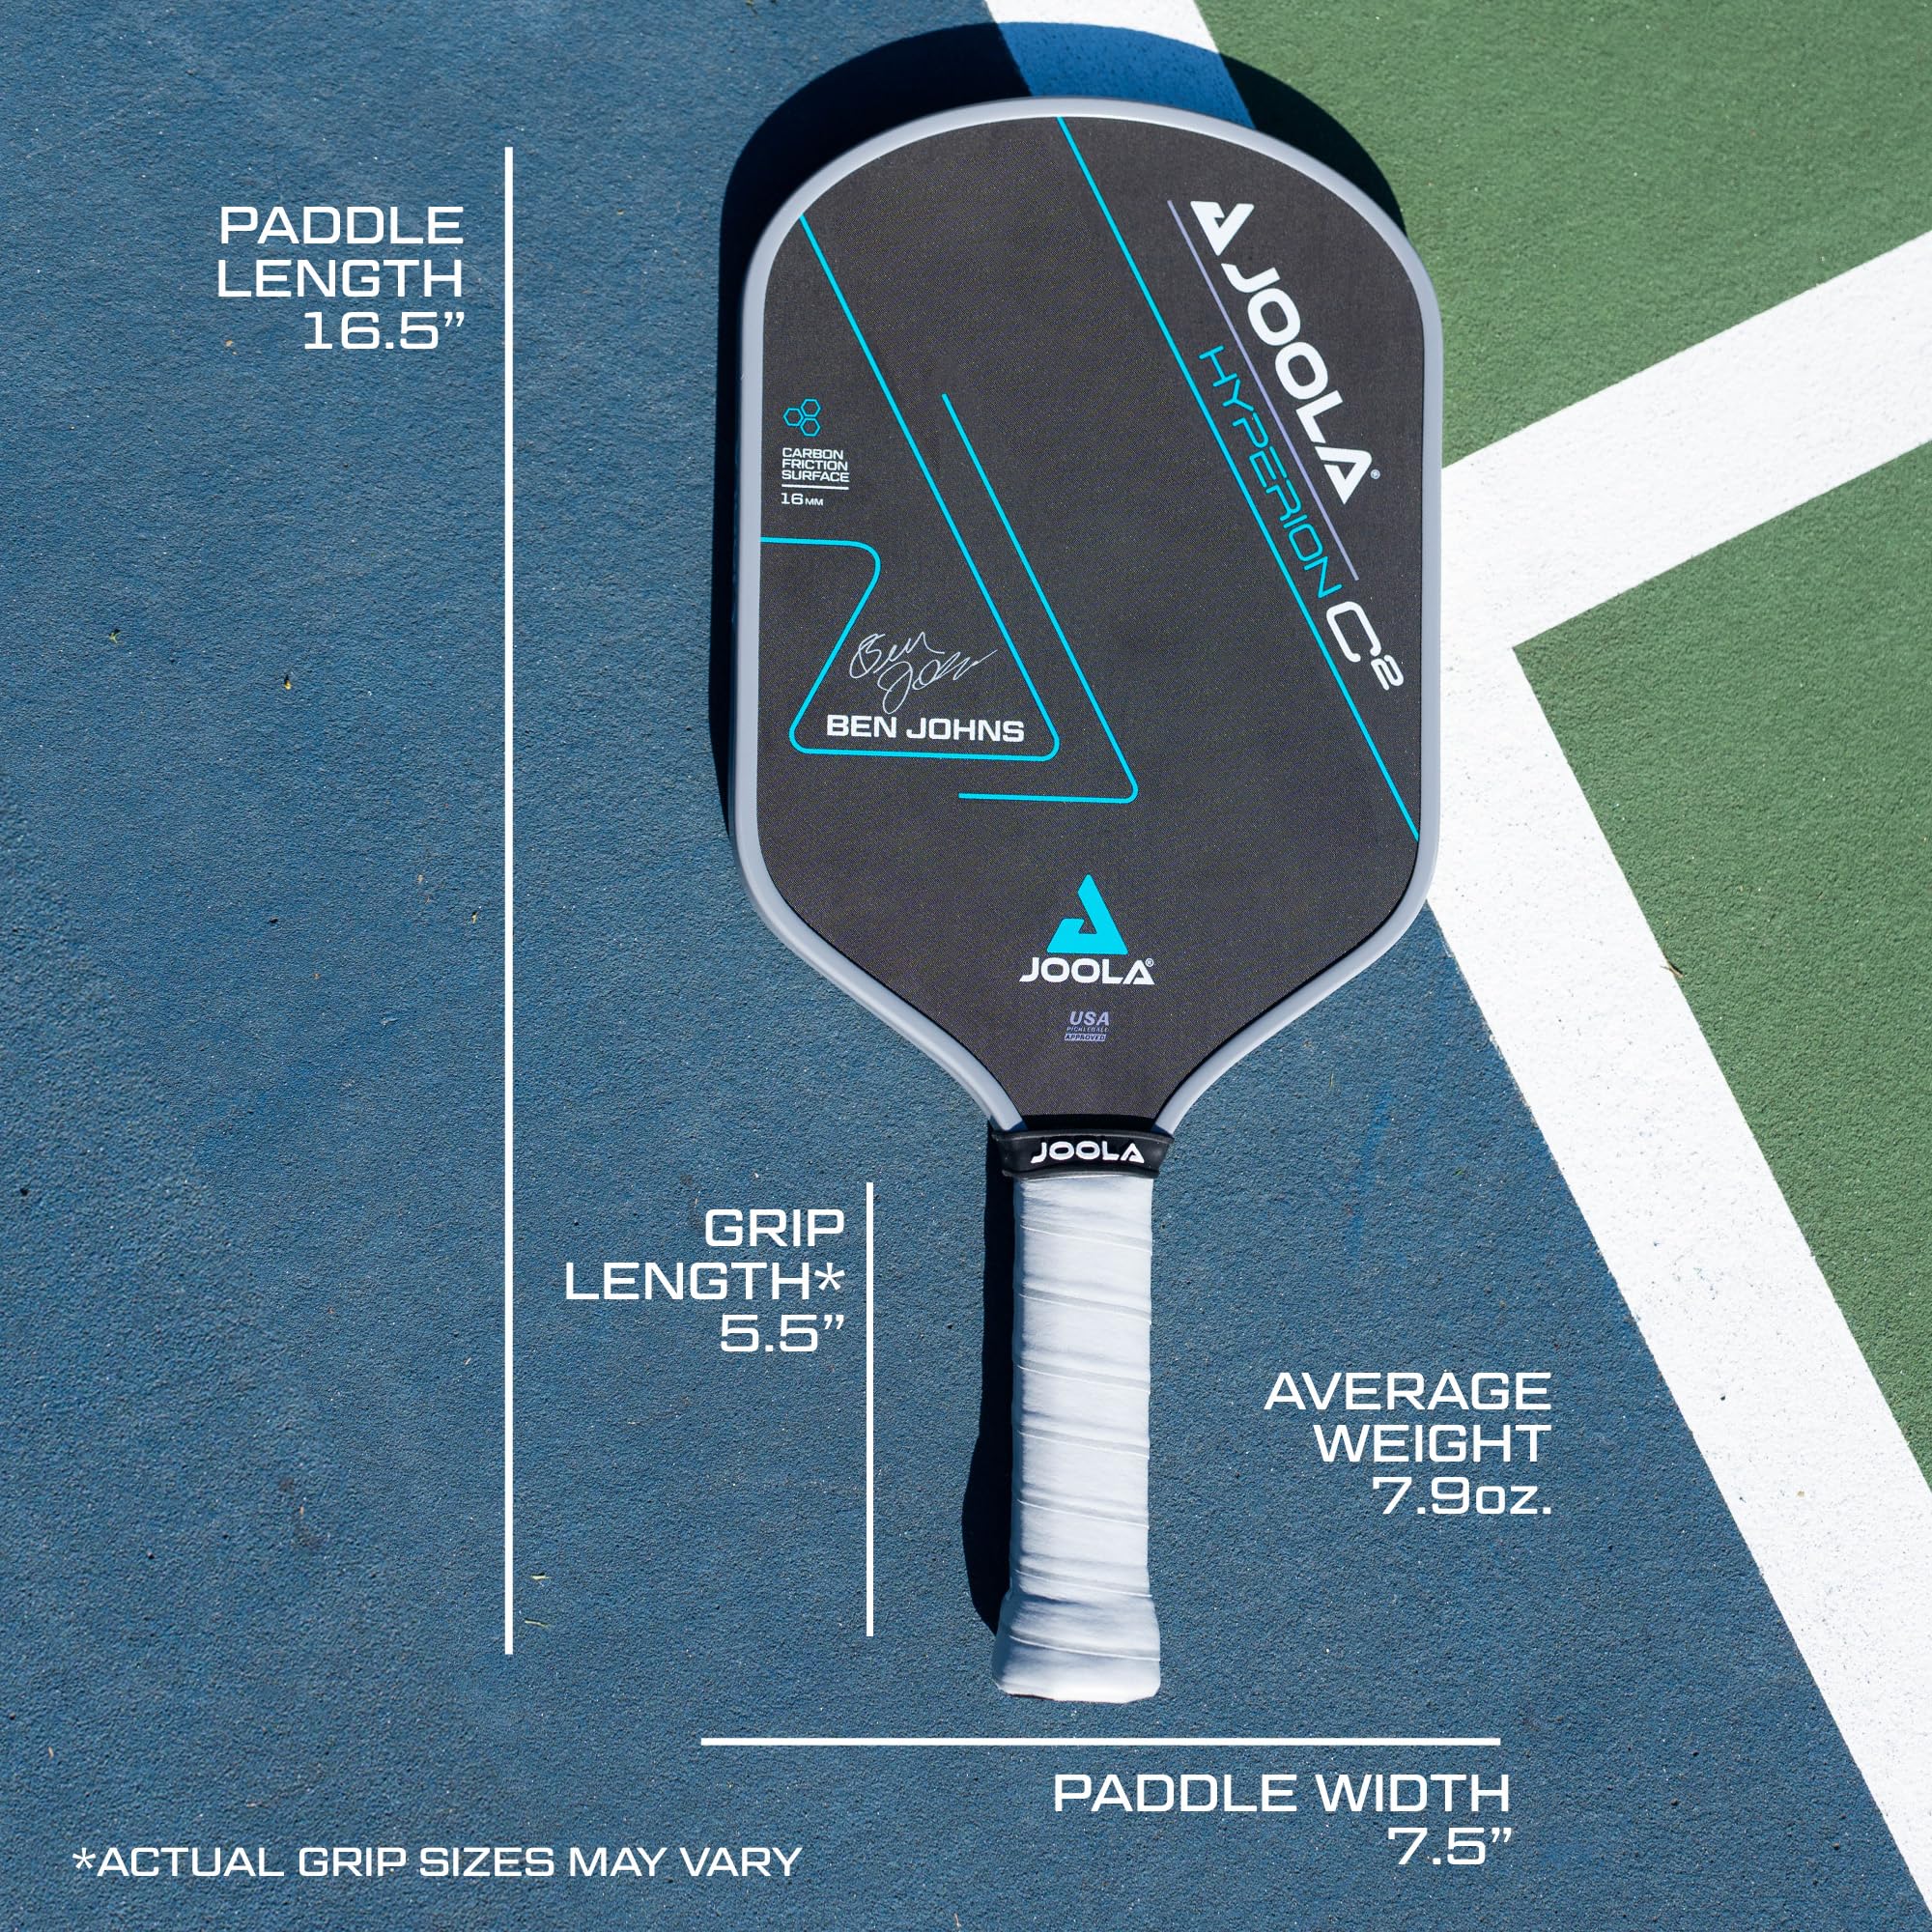 JOOLA Ben Johns Hyperion C2 Pickleball Paddle - Aero-Curve Hyperion Shape with Charged Surface Technology from The Ben Johns Perseus - Balanced Pickleball Racket with Pop & Power - USAPA Approved